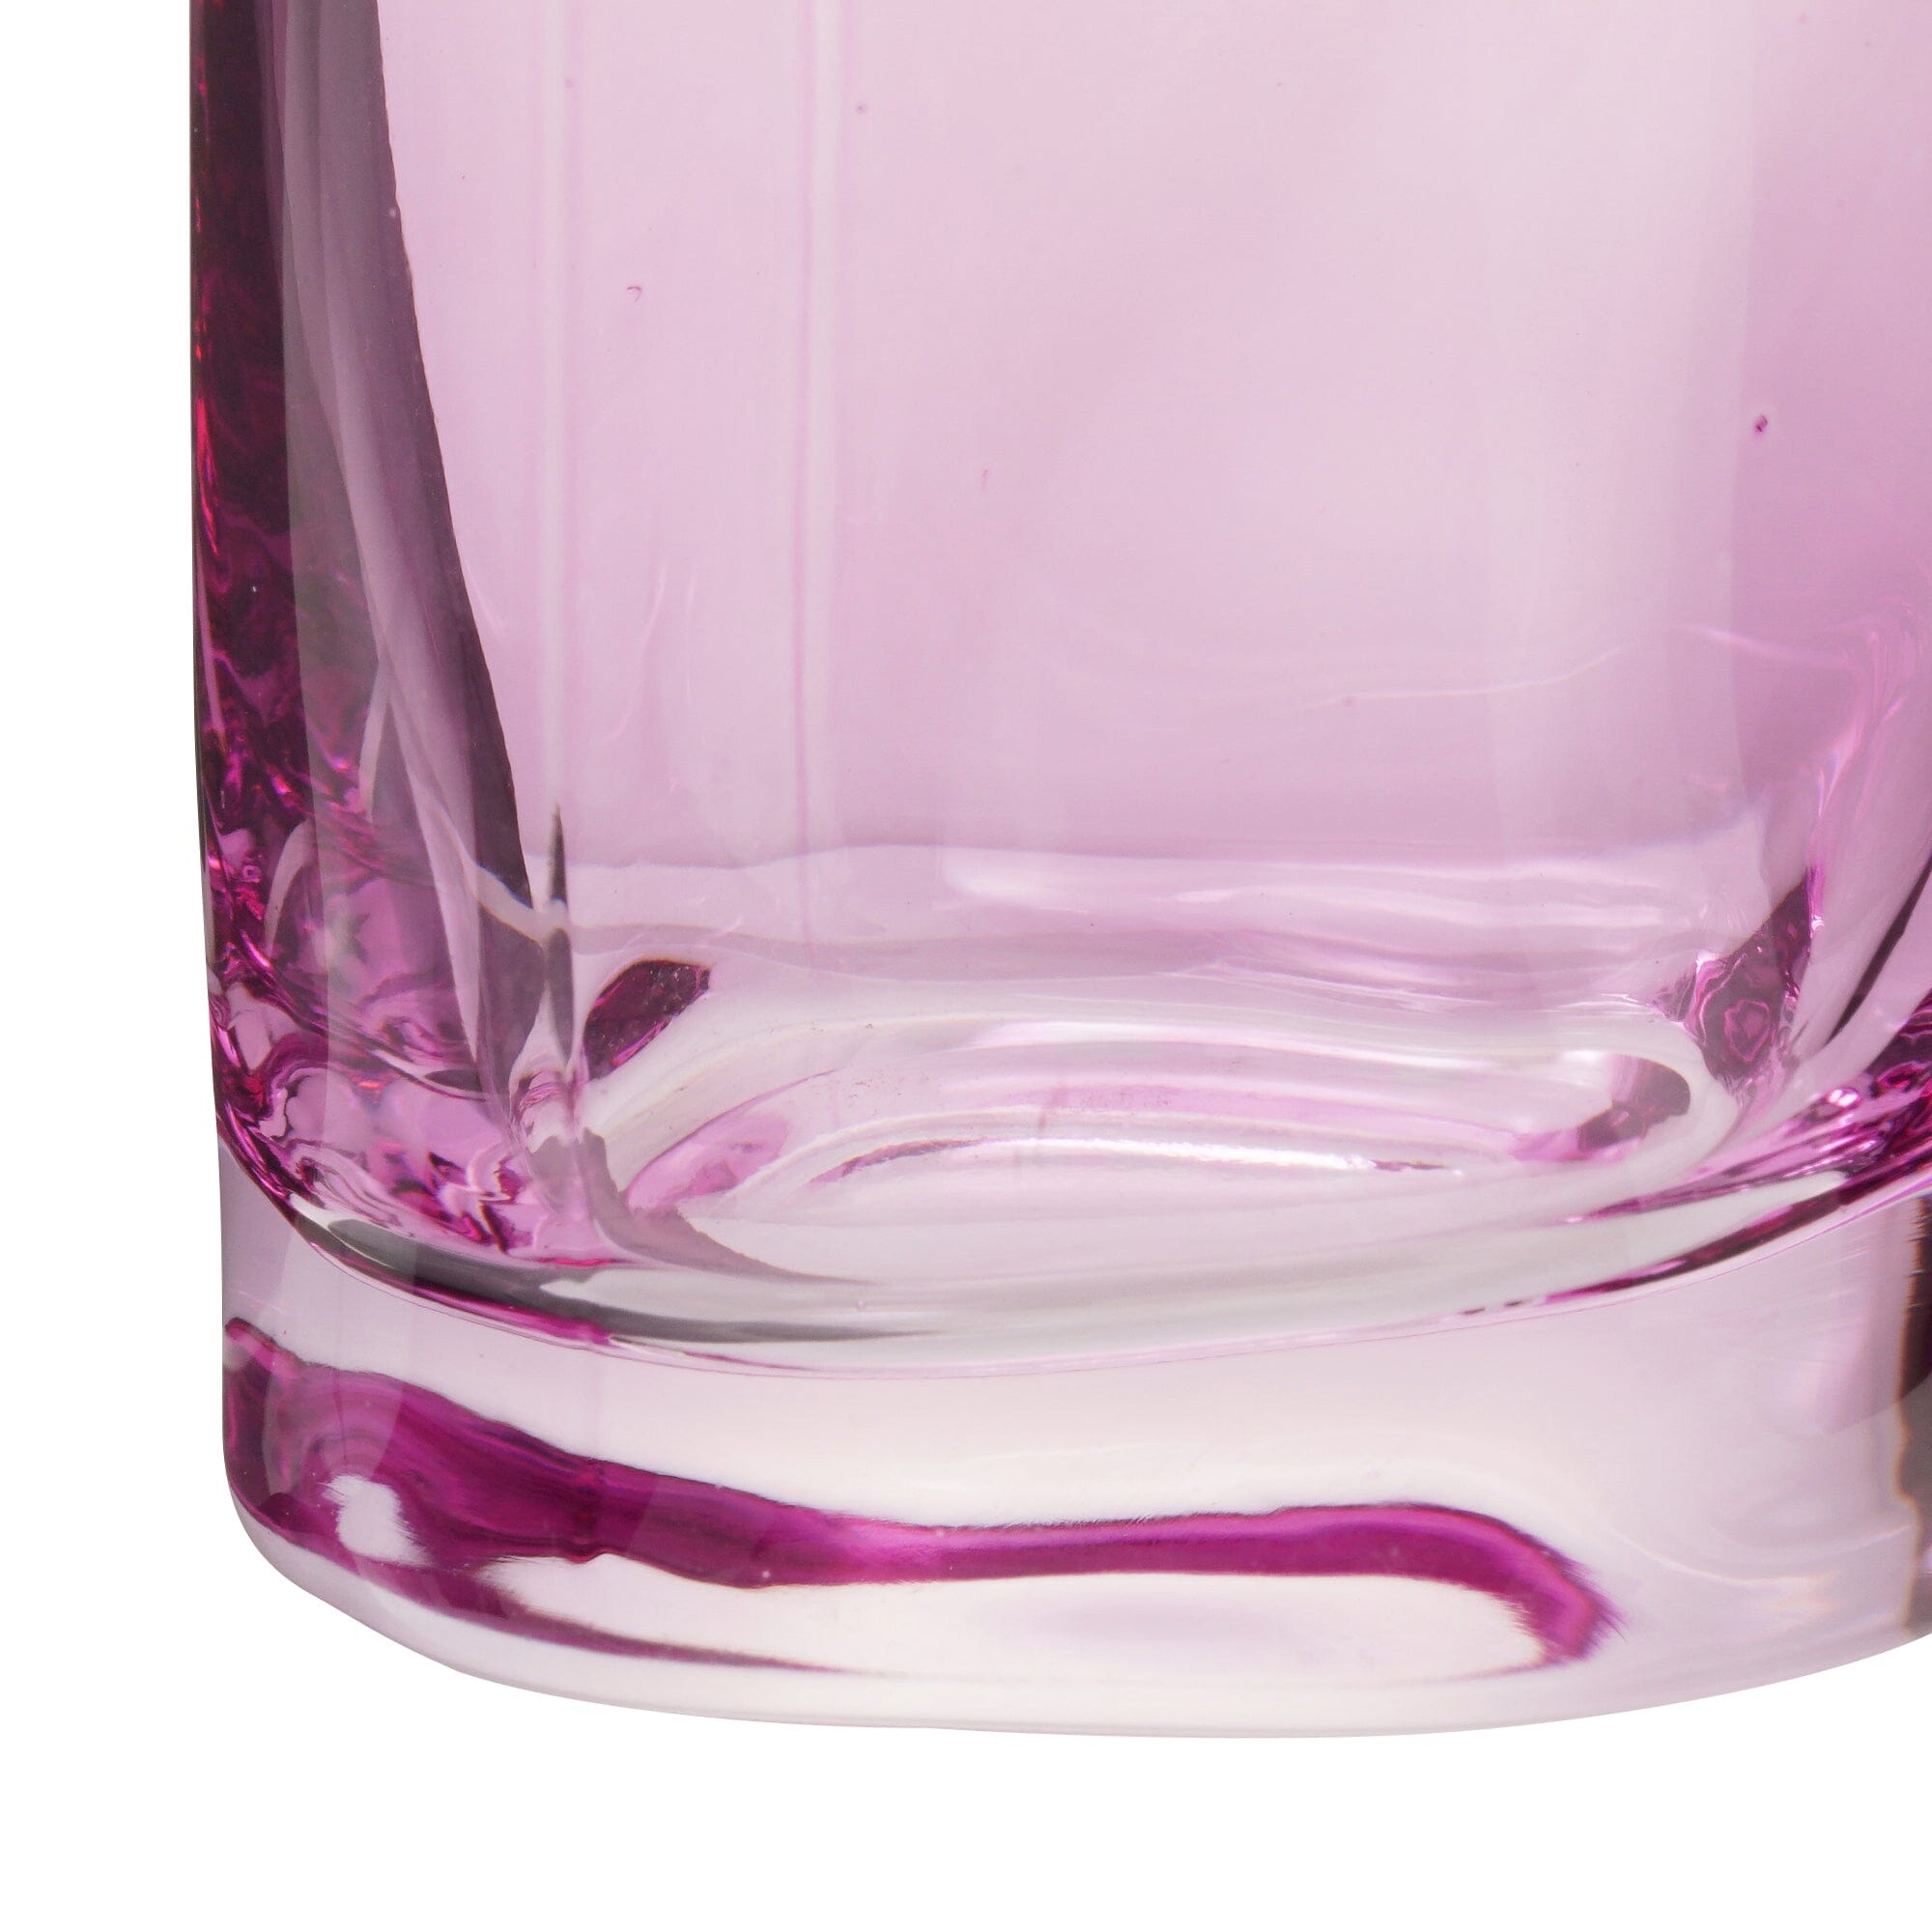 Swell Tumbler Pink